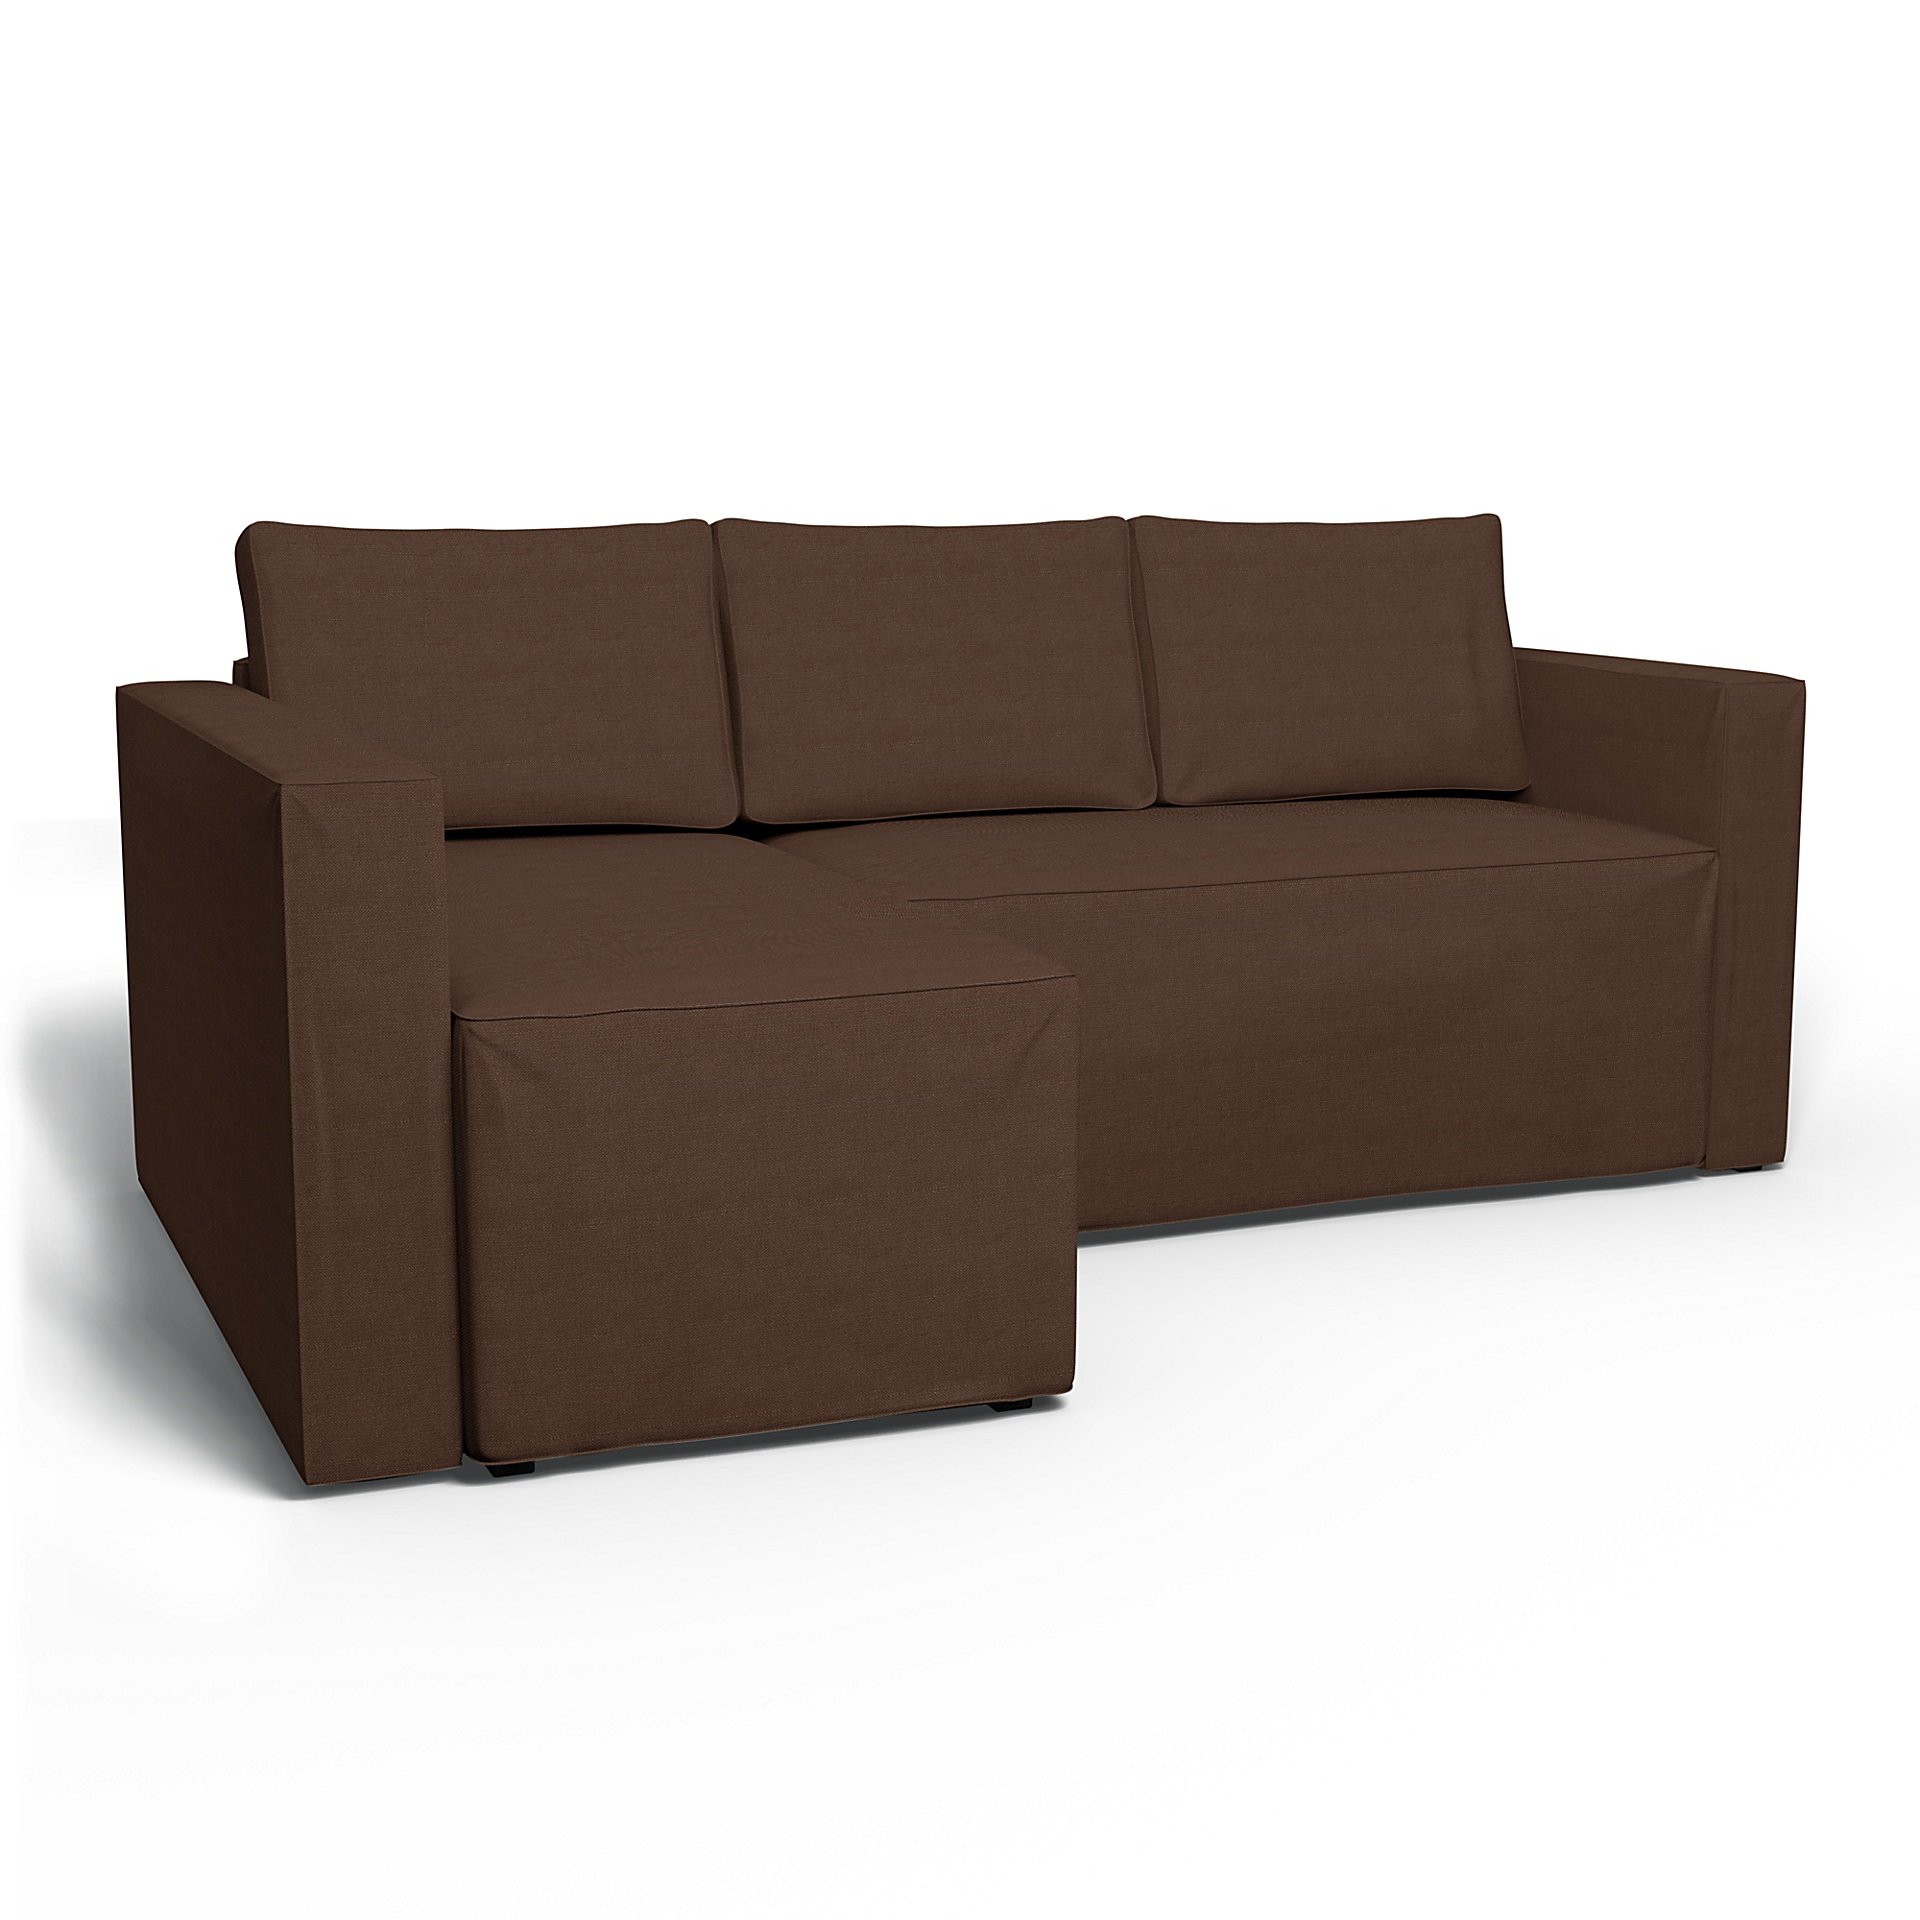 IKEA - Manstad Sofa Bed with Left Chaise Cover, Chocolate, Linen - Bemz